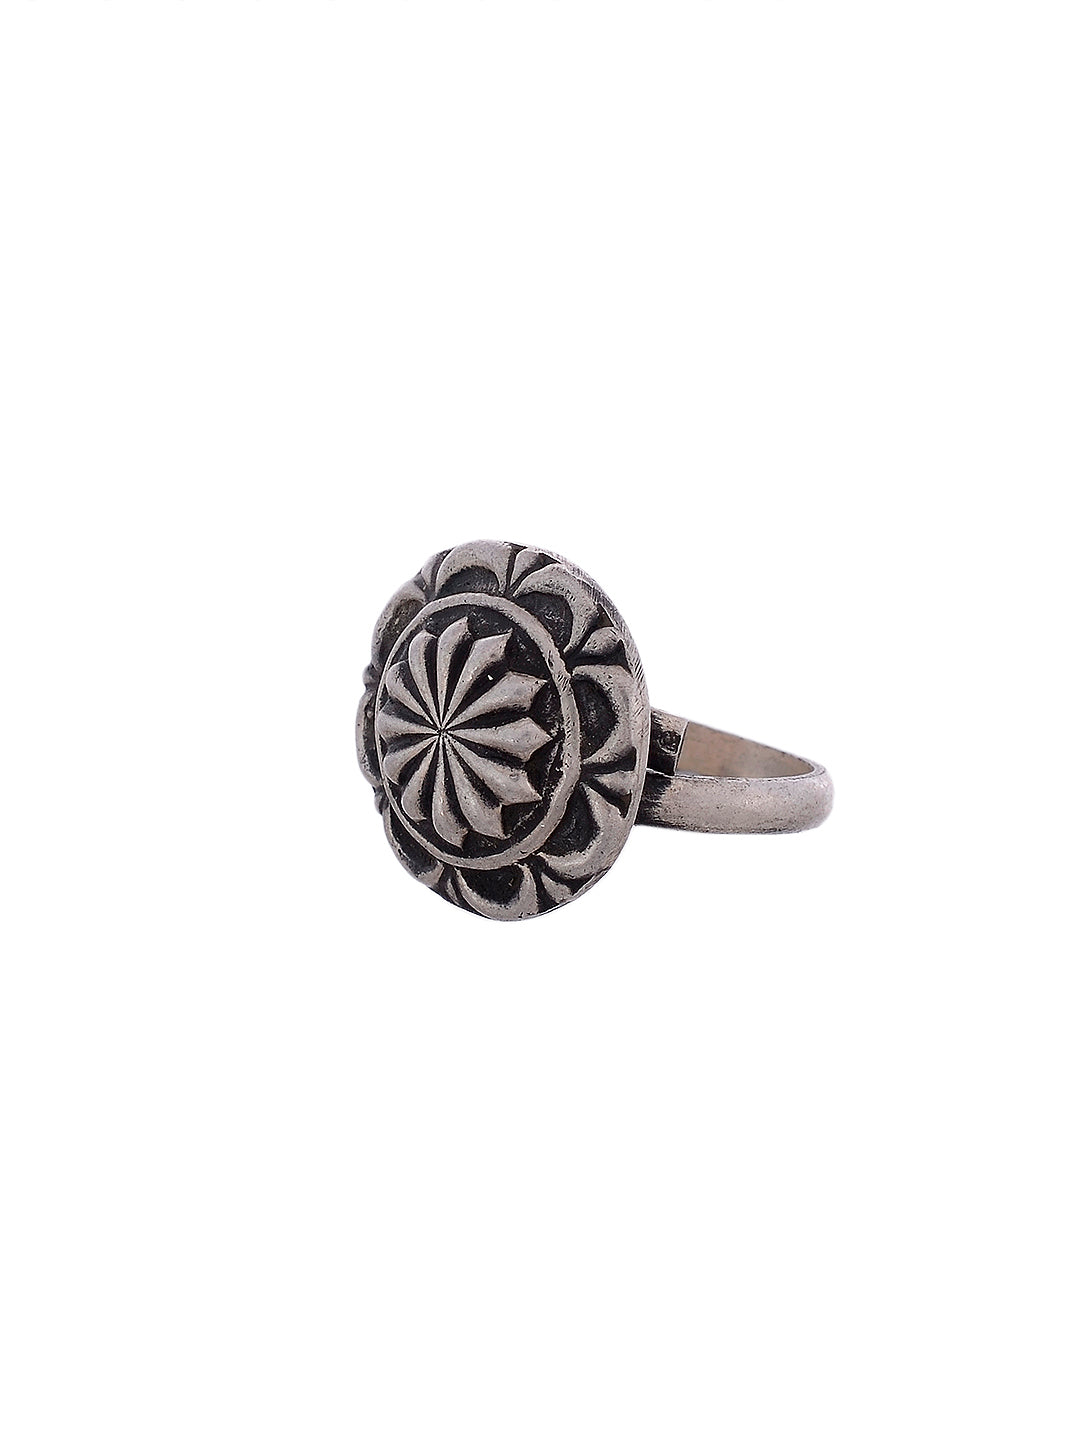 Women Jewelry 925 Sterling Silver Oxidized Adjustable Ring